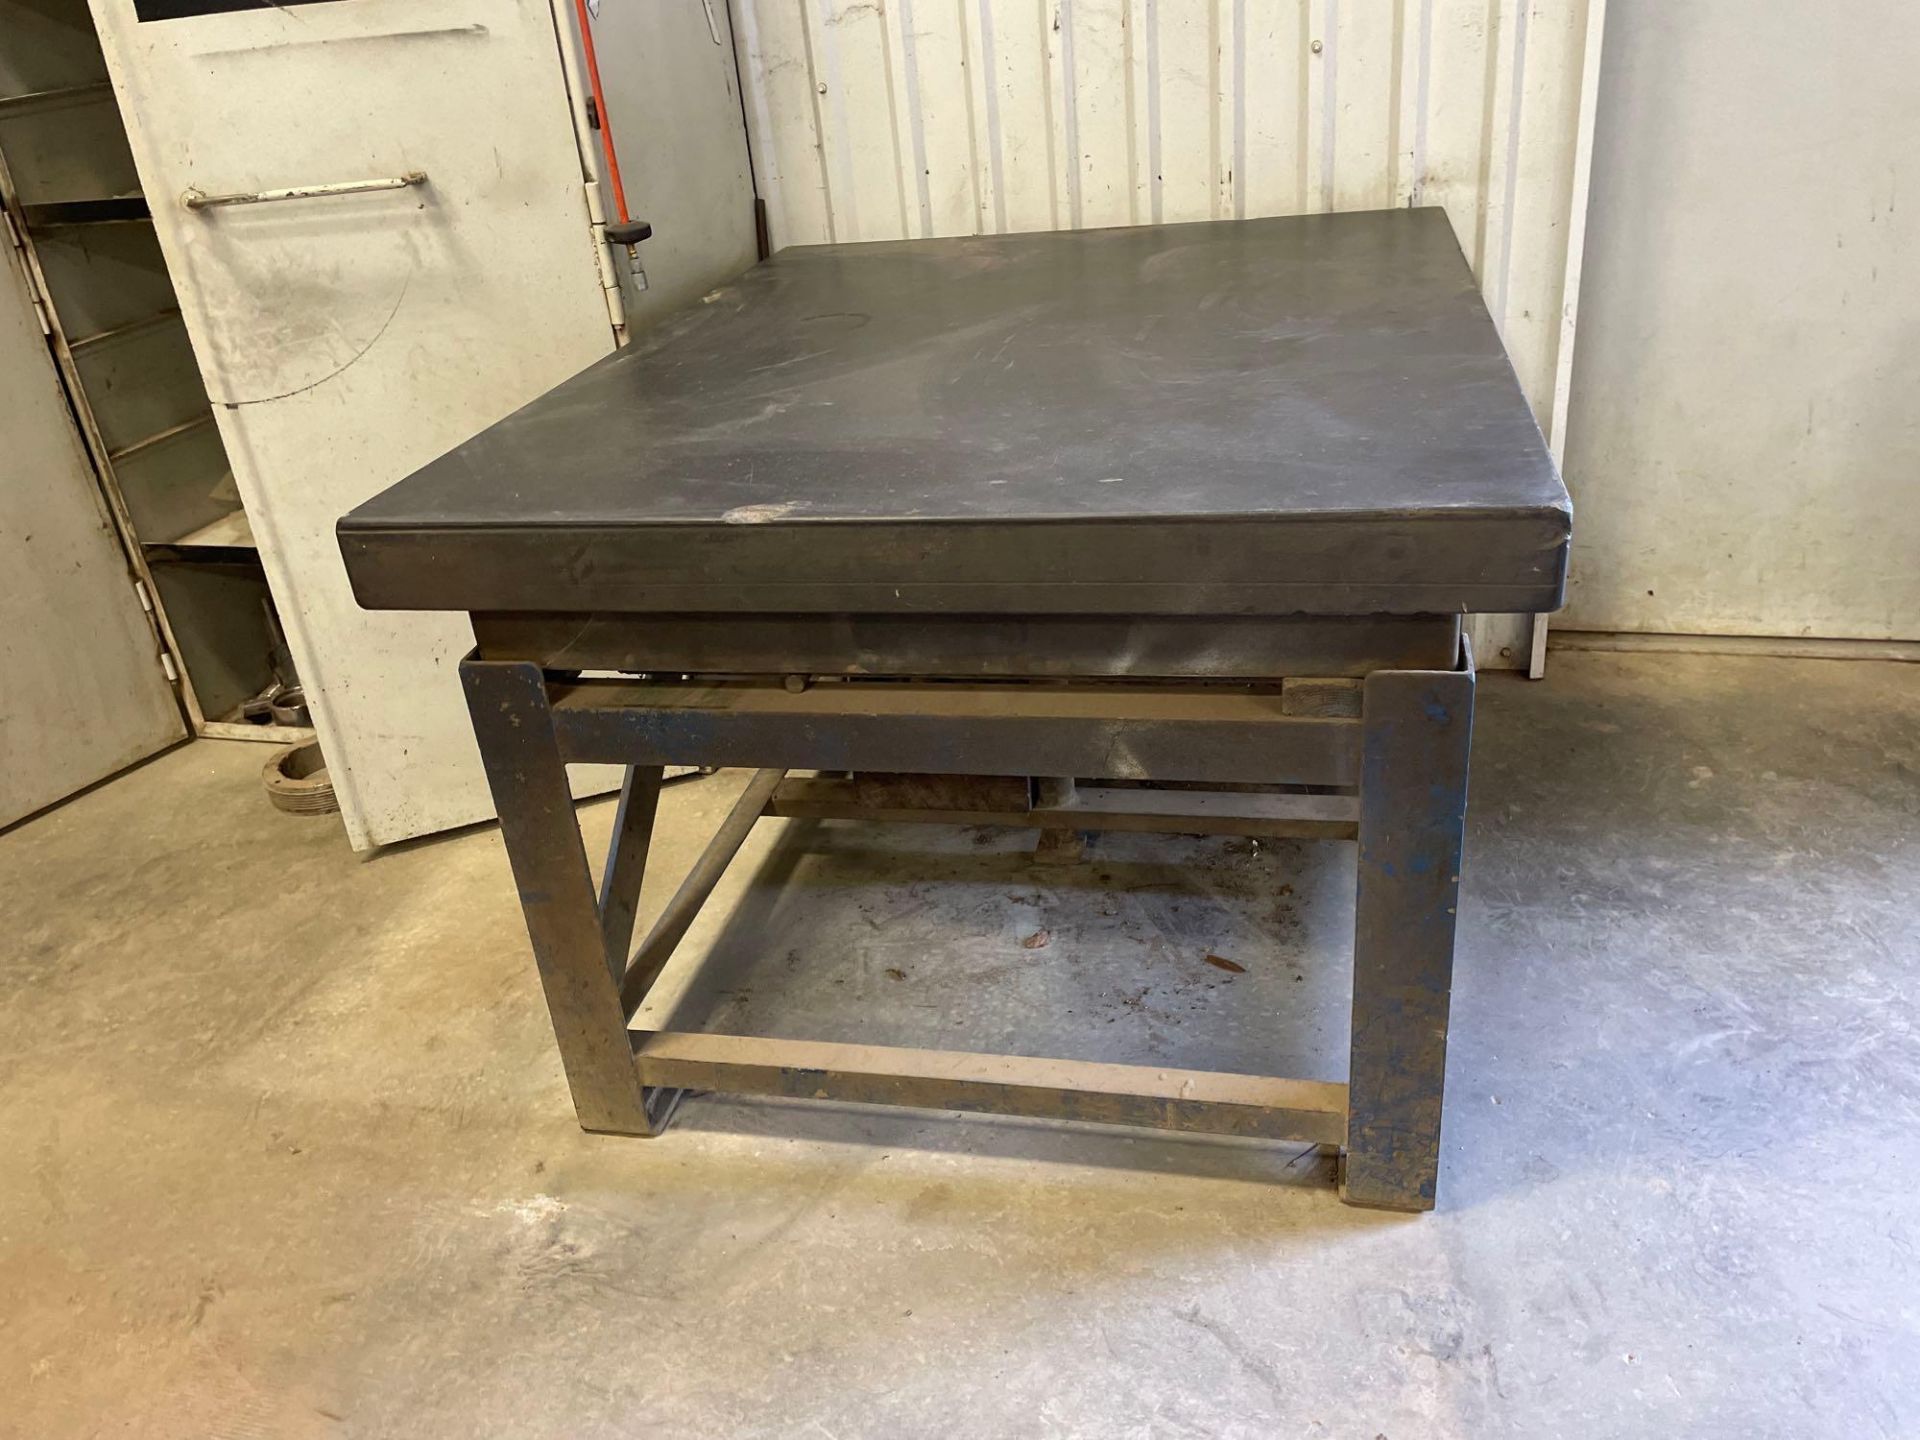 60” X 48” X 4” Granite Table on Heavy Duty Metal Base Overall Height 35” - Image 2 of 6